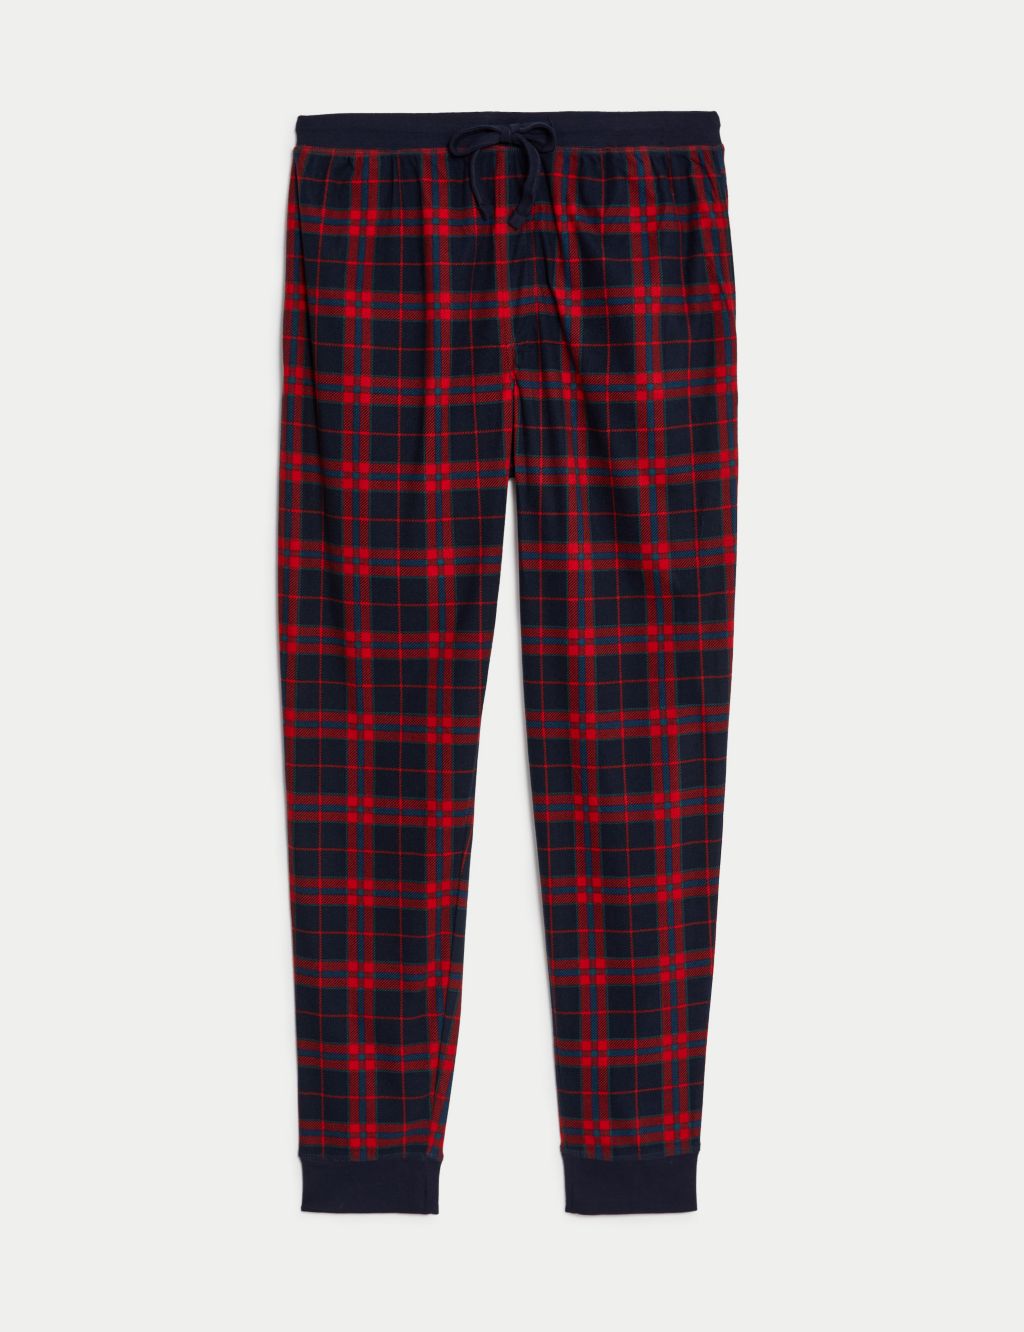 Supersoft Checked Loungewear Bottoms image 2